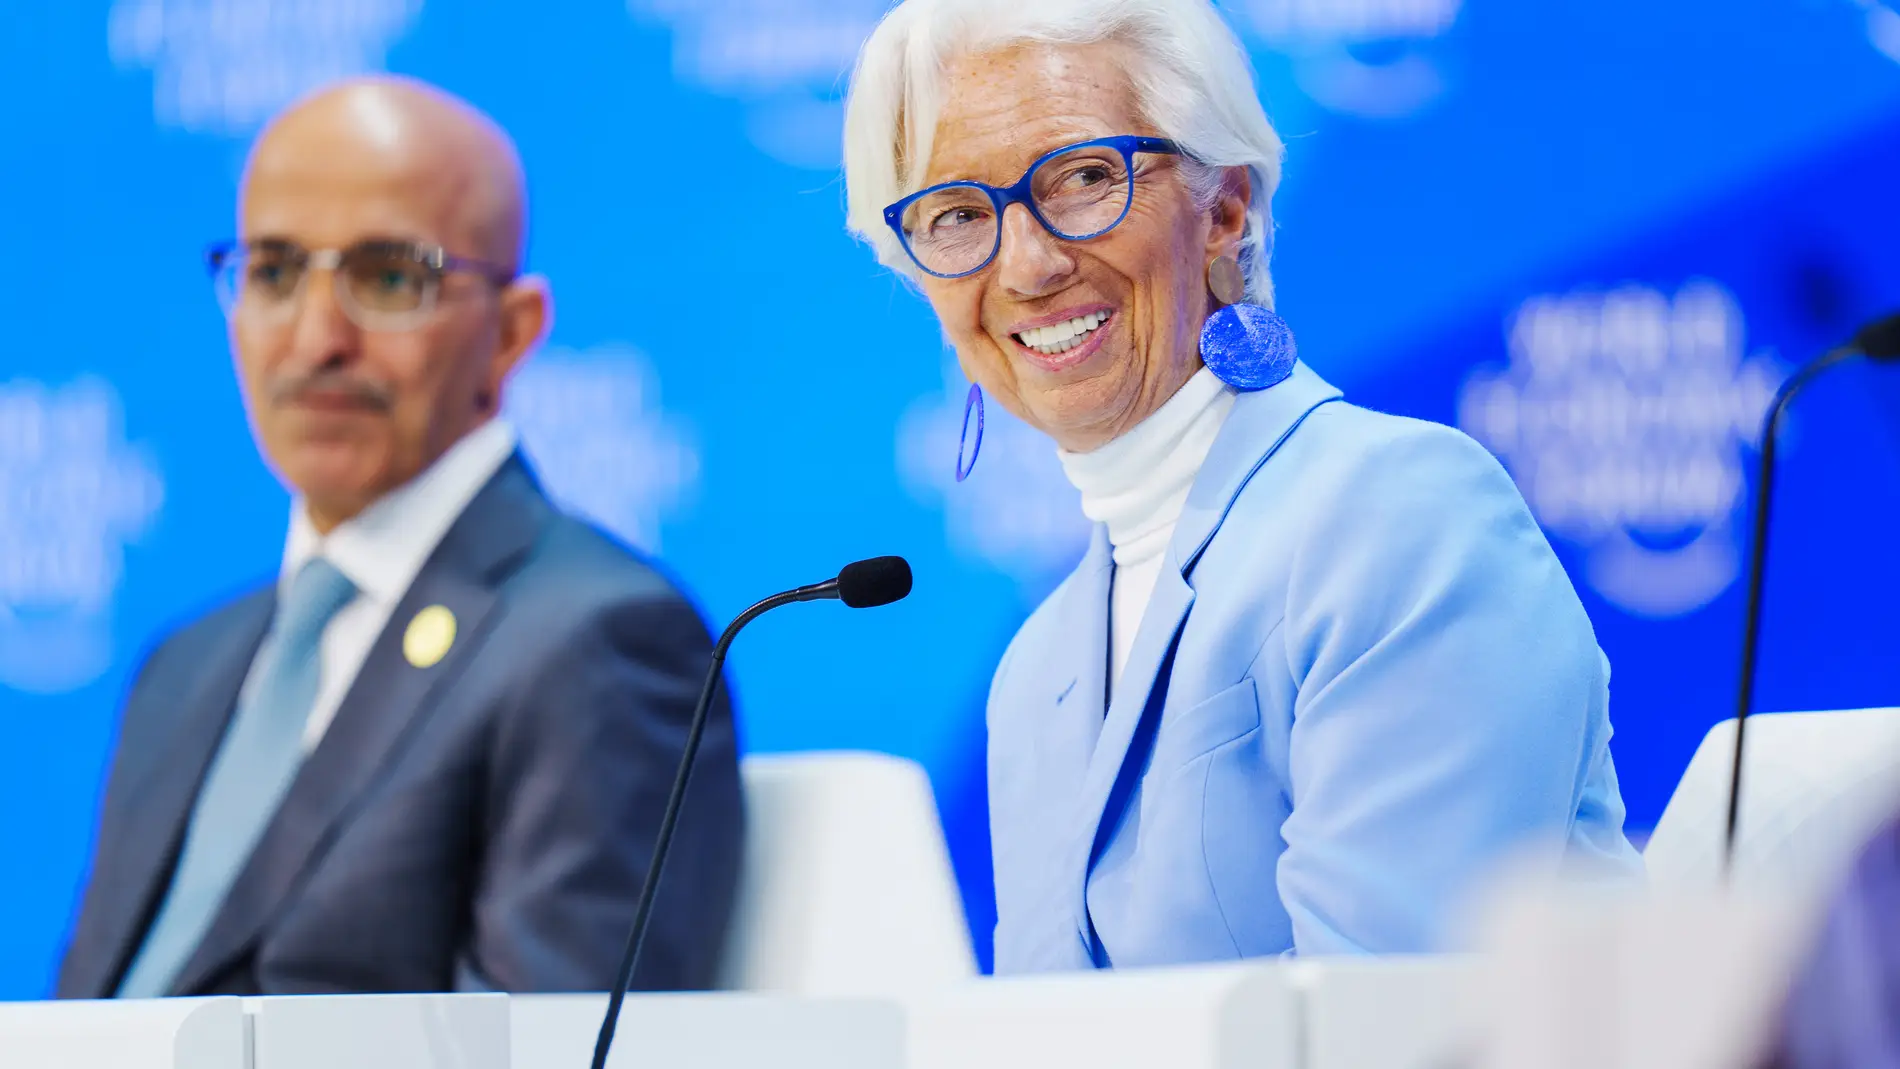 Christine Lagarde, president of the European Central Bank, speaking in the Global Economic Outlook session at the World Economic Forum Annual Meeting 2024 in Davos-Klosters, Switzerland, 19 January, 2024. Congress Hall